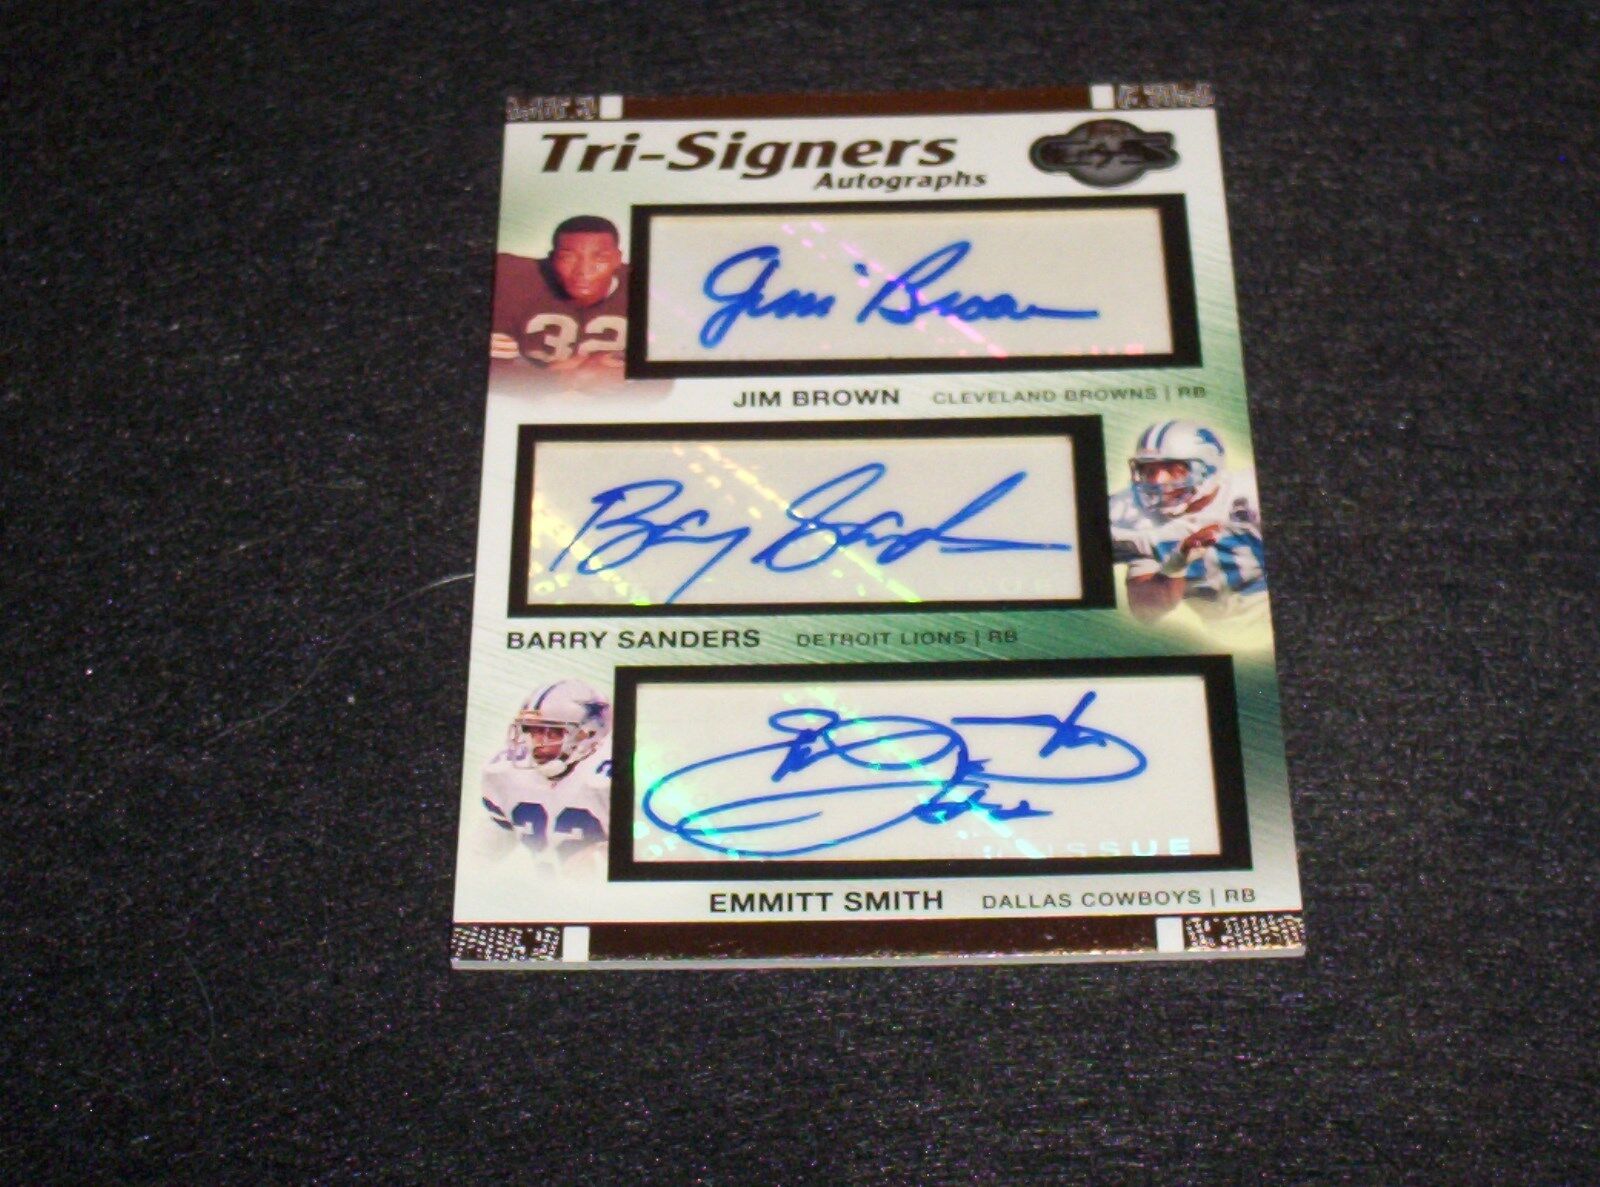 2007 Topps Co-Signers Jim Brown Barry Sanders Emmitt Smith Autograph #1/20 1/1